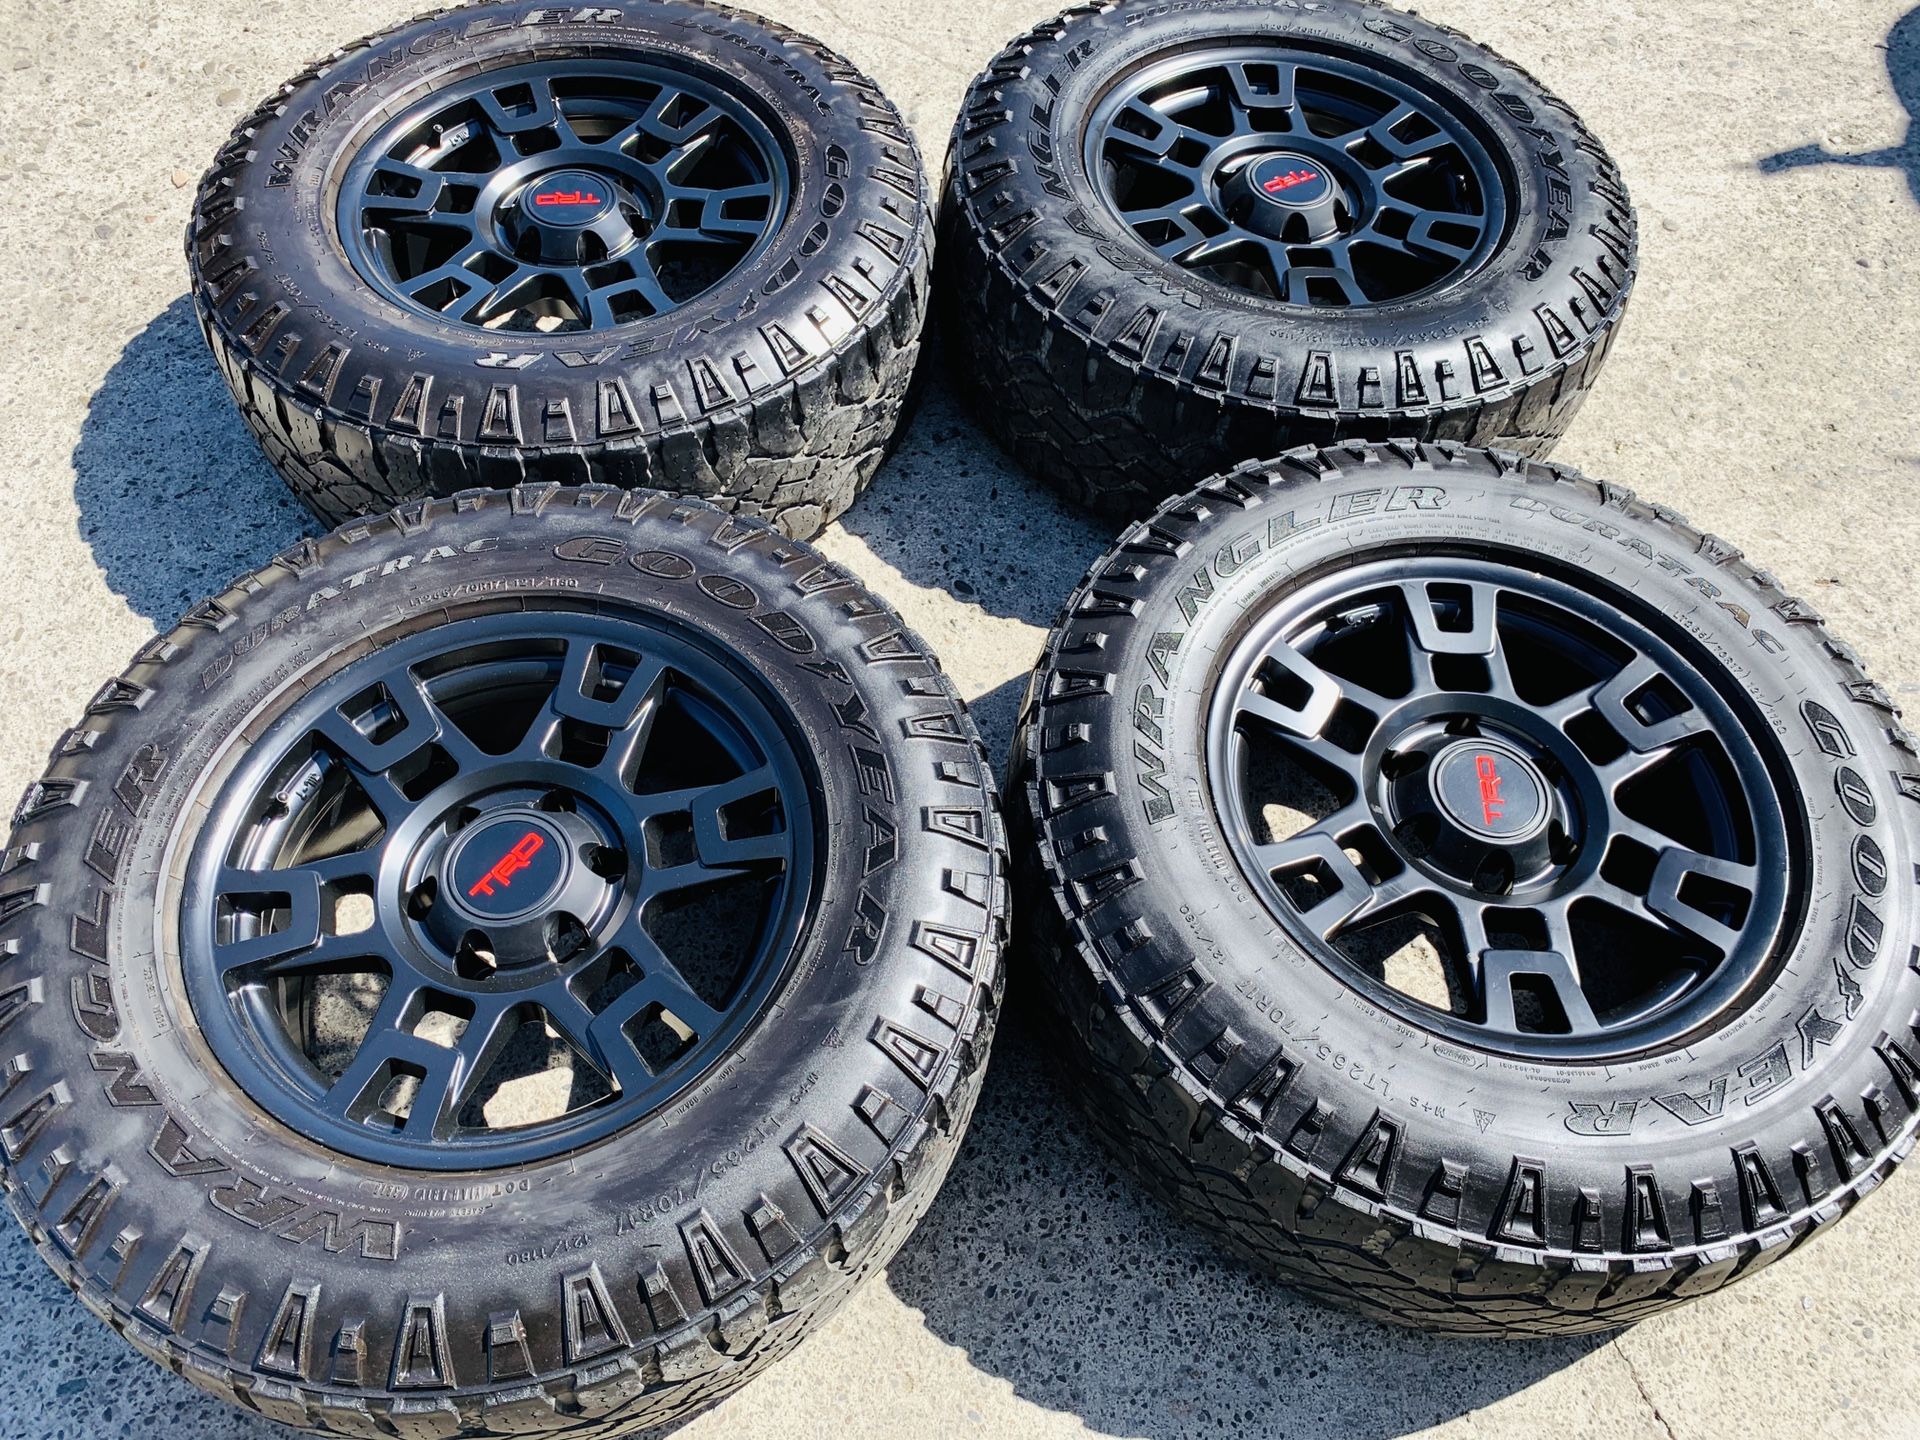 17” Brand new Trd style rims with good used mud tires 2657017 6 lug Chevy gmc Toyota